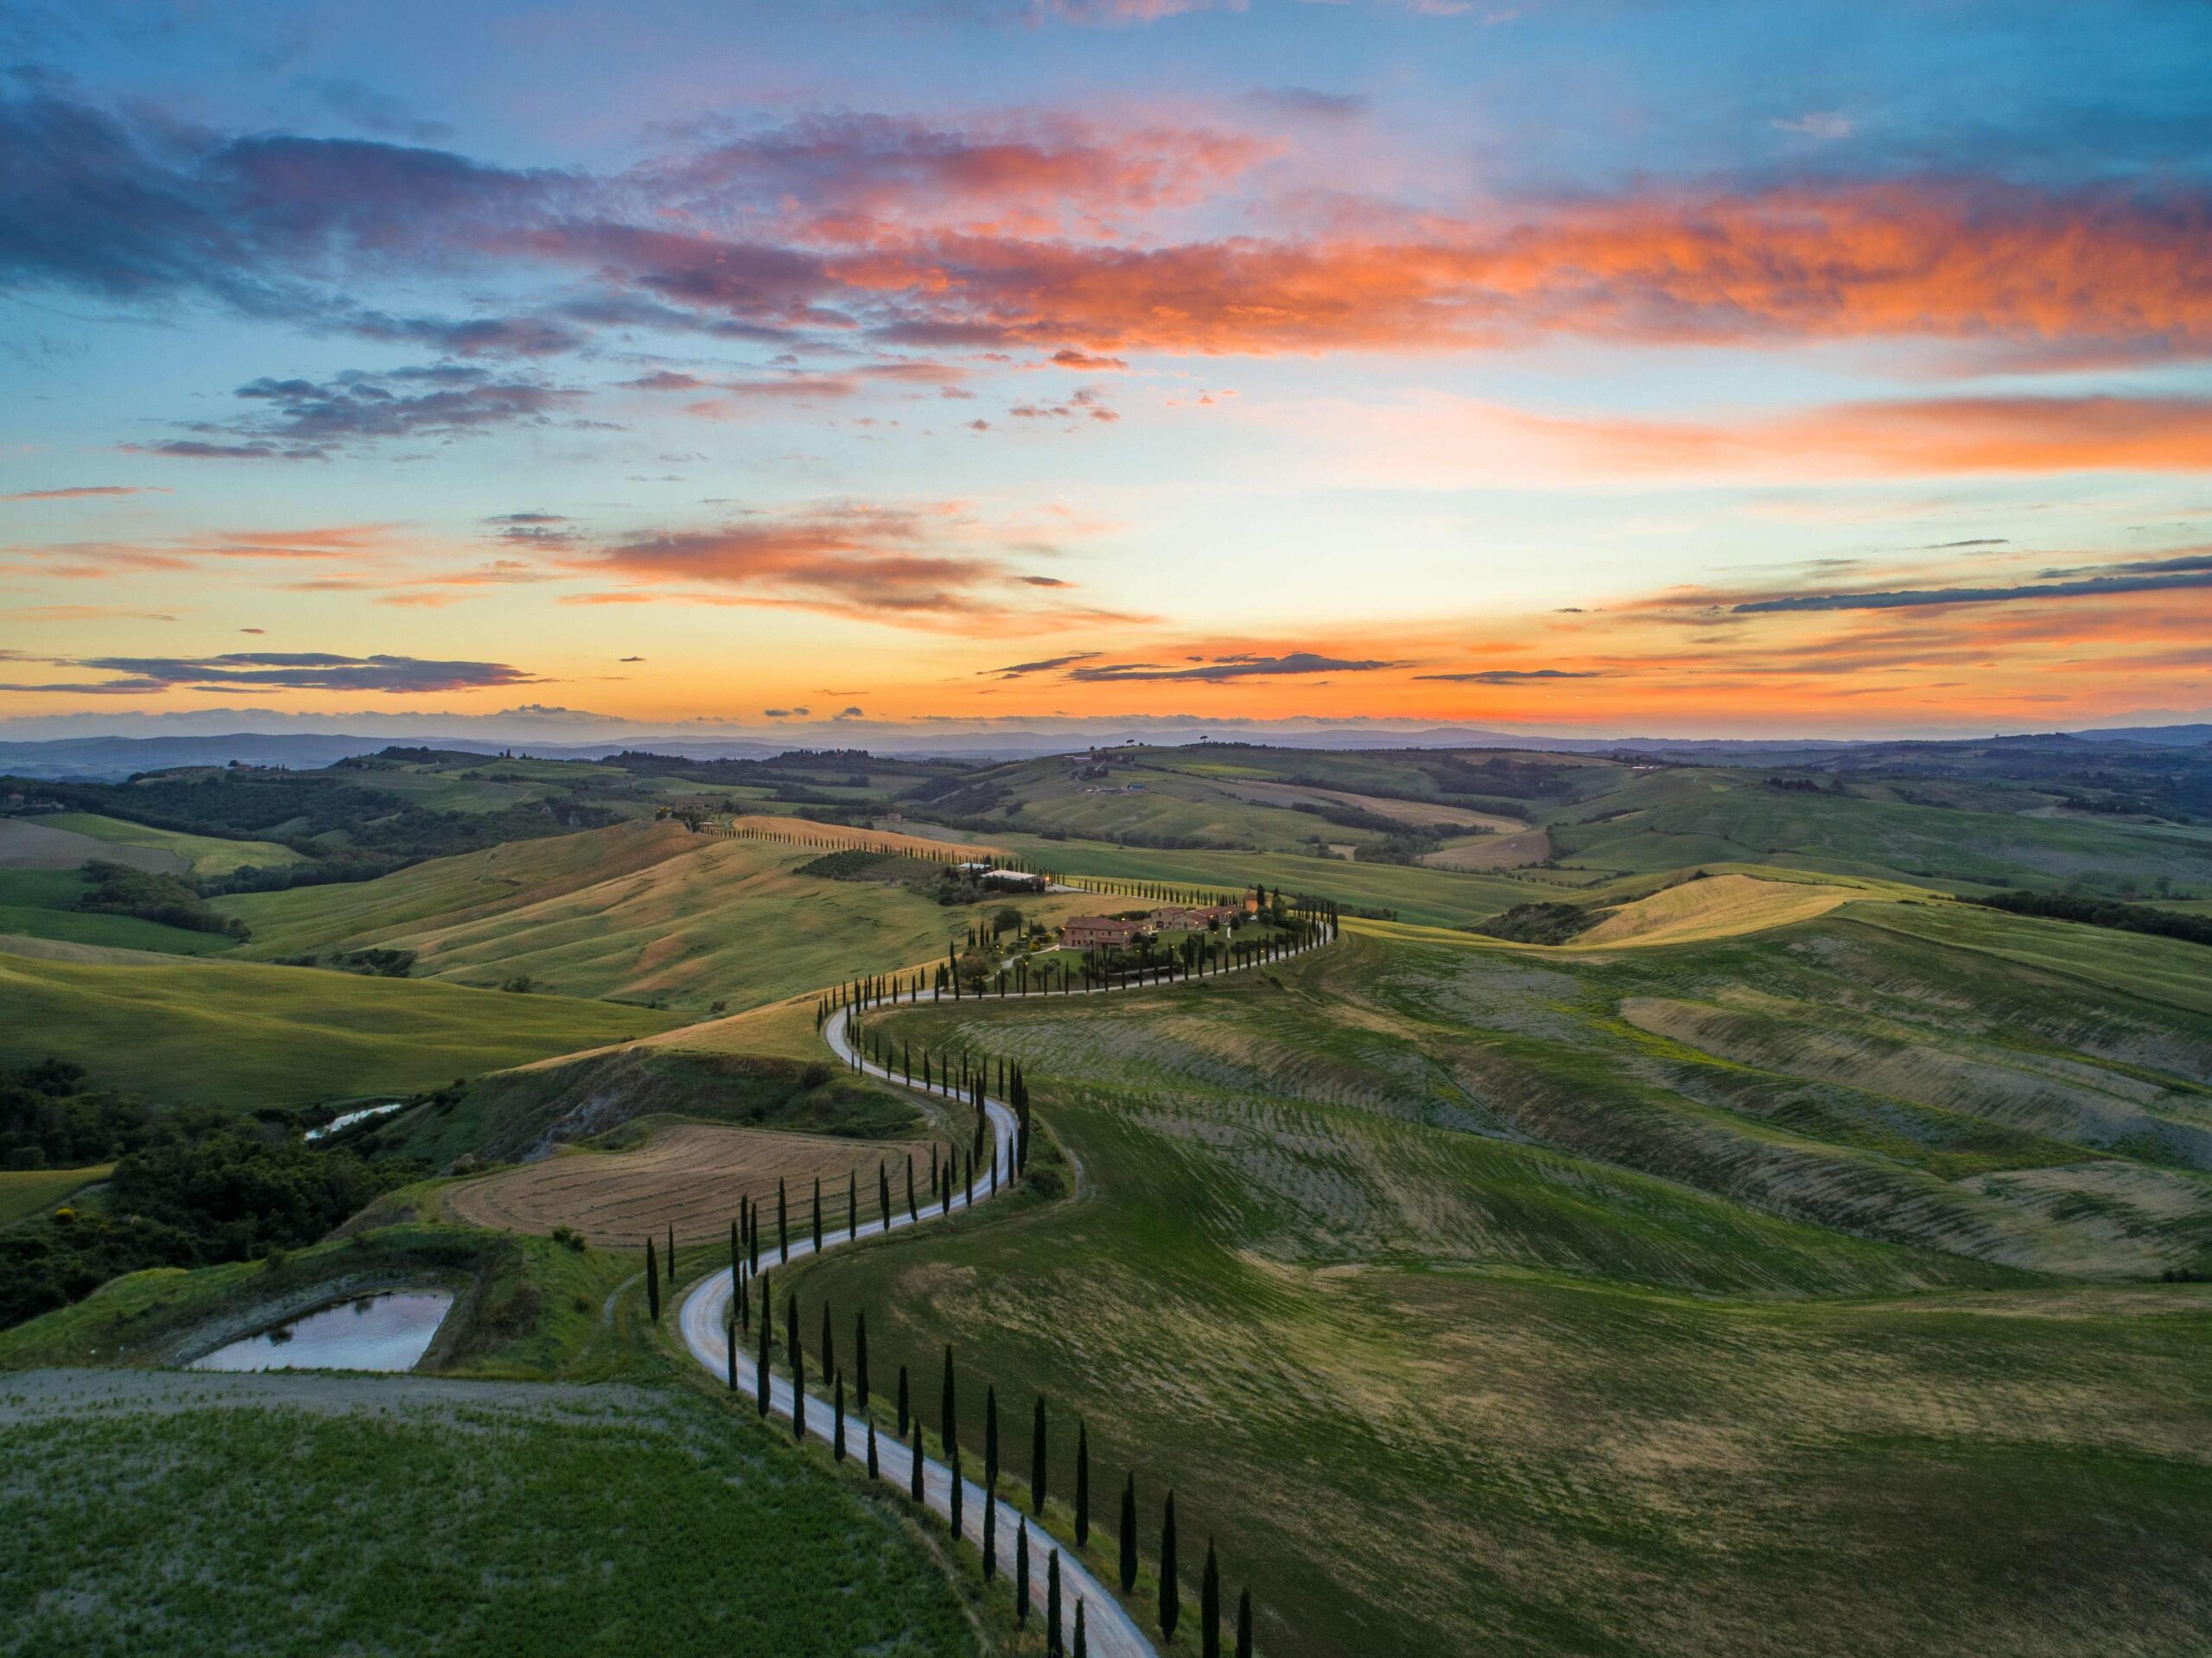 Sunset over the lush green Tuscan countryside